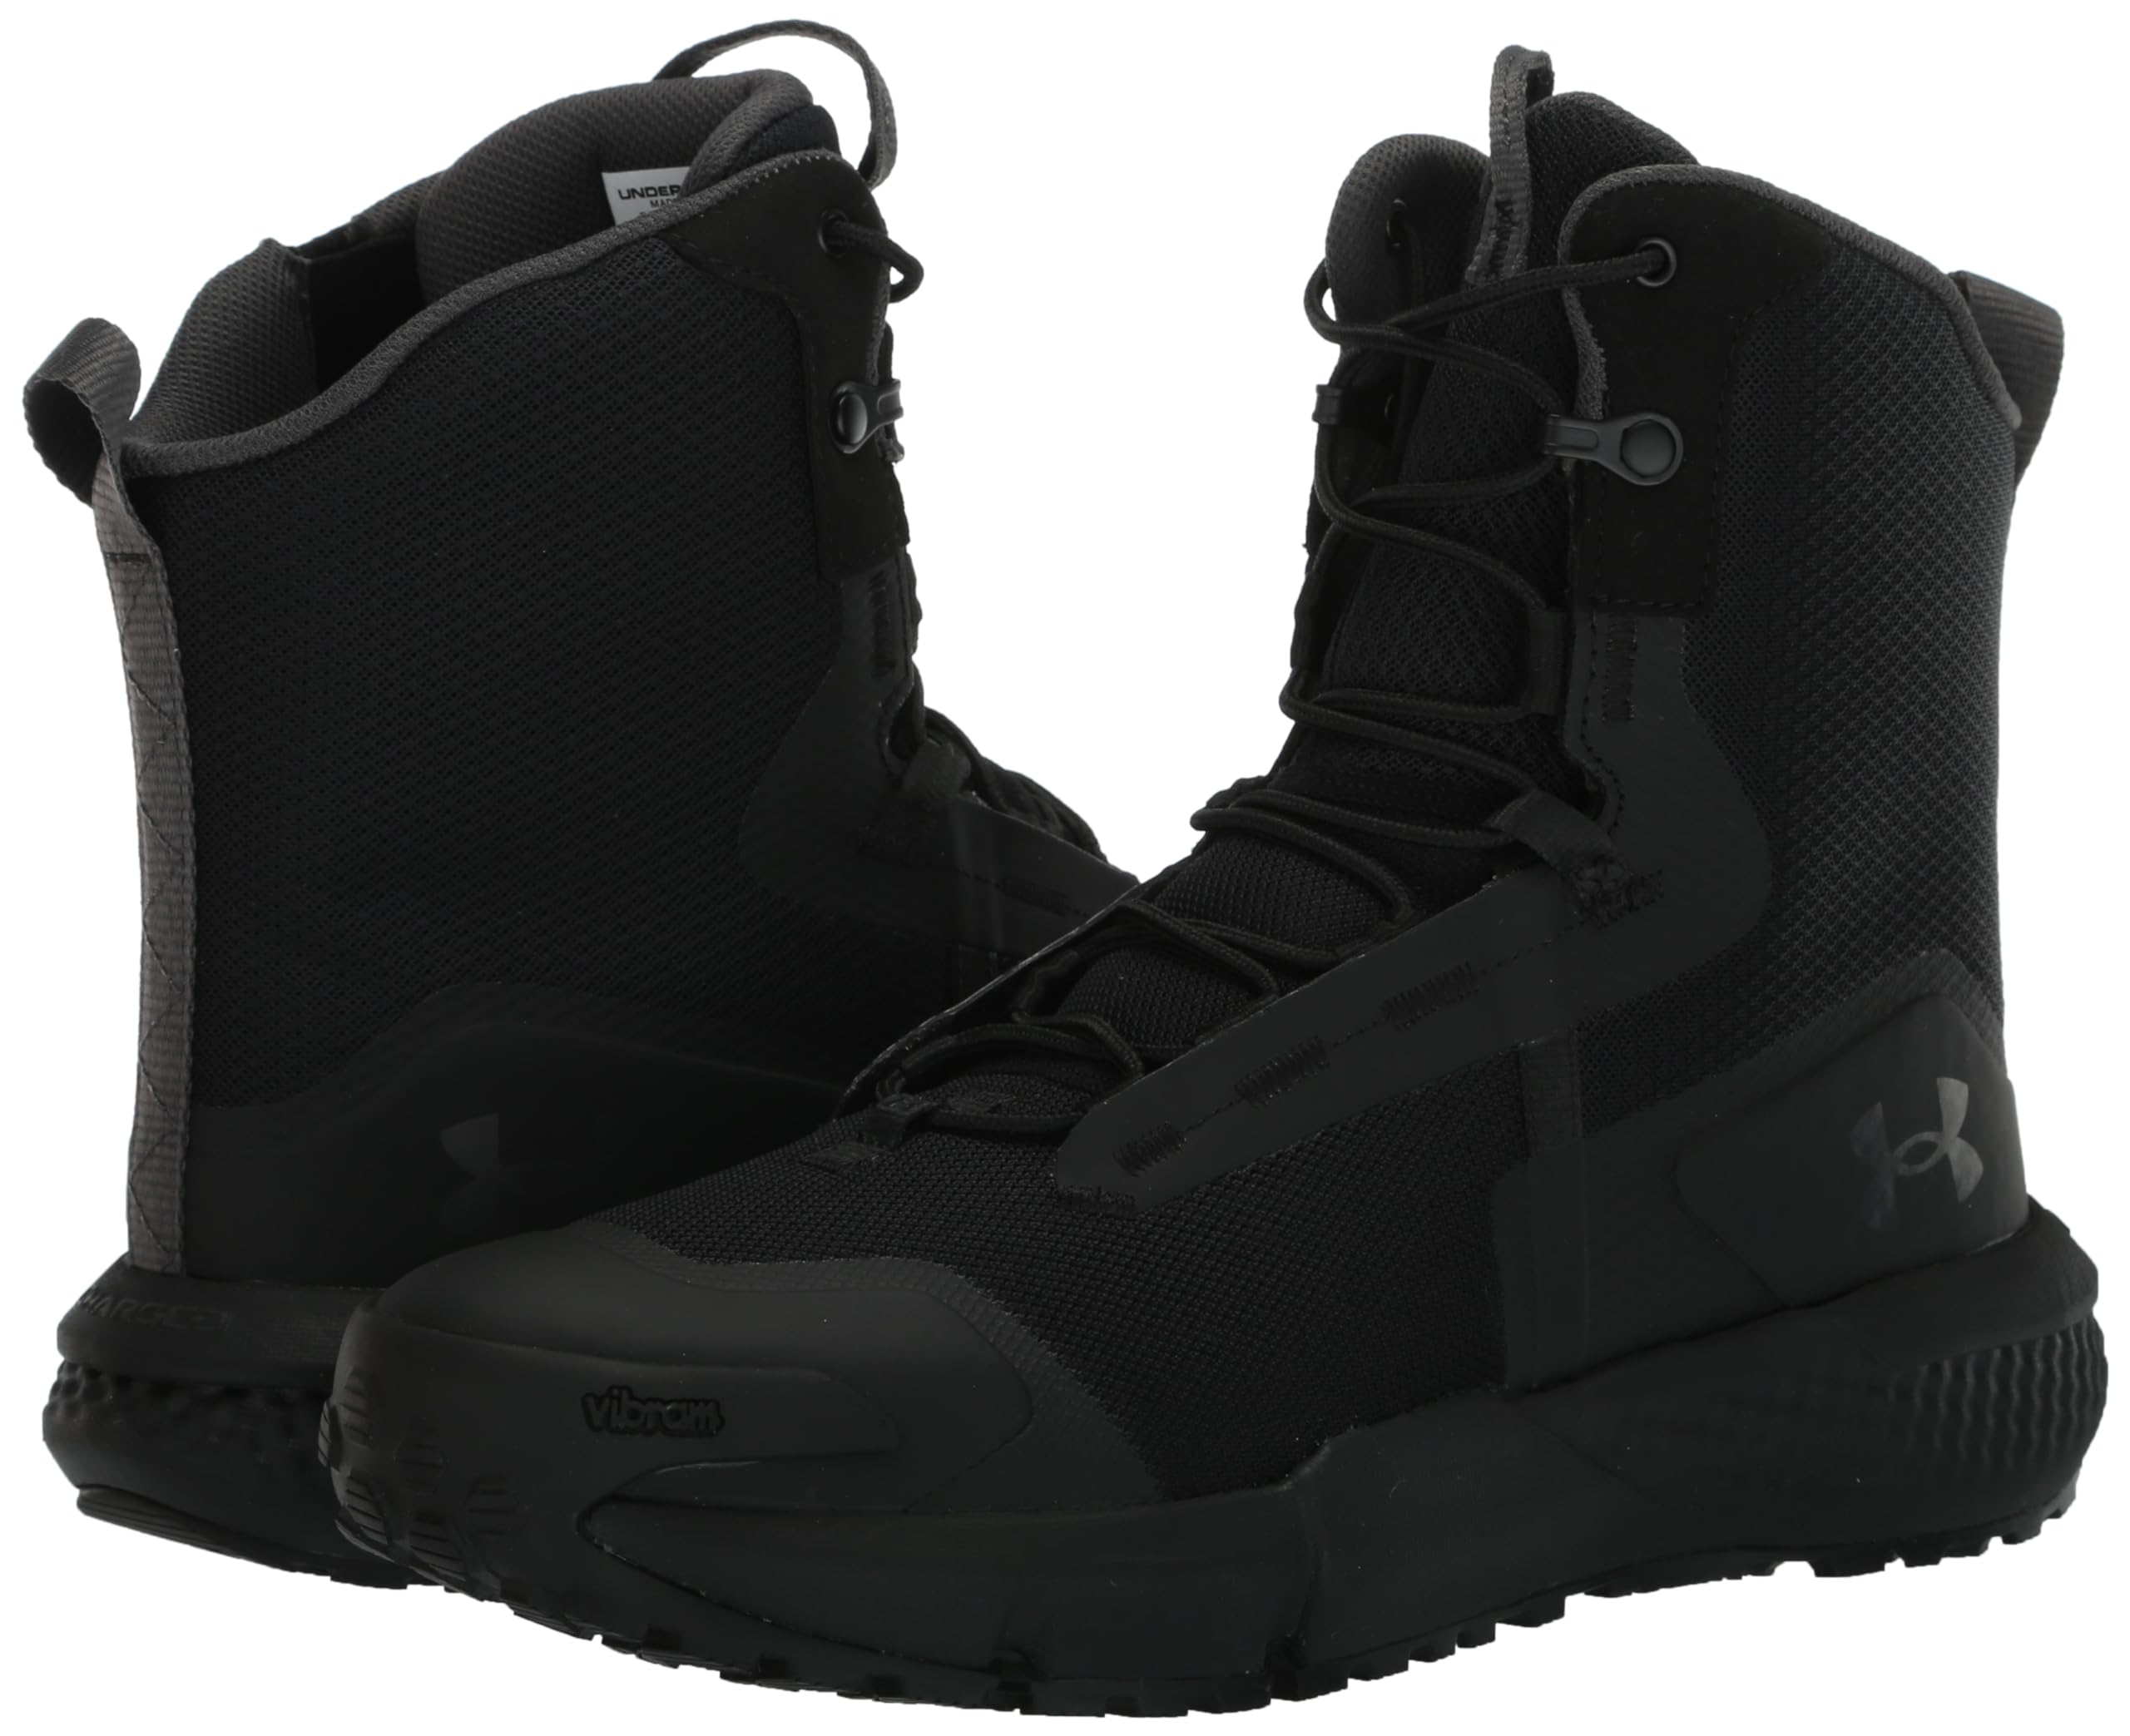 Under Armour Men's Charged Valsetz Zip Military and Tactical Boot